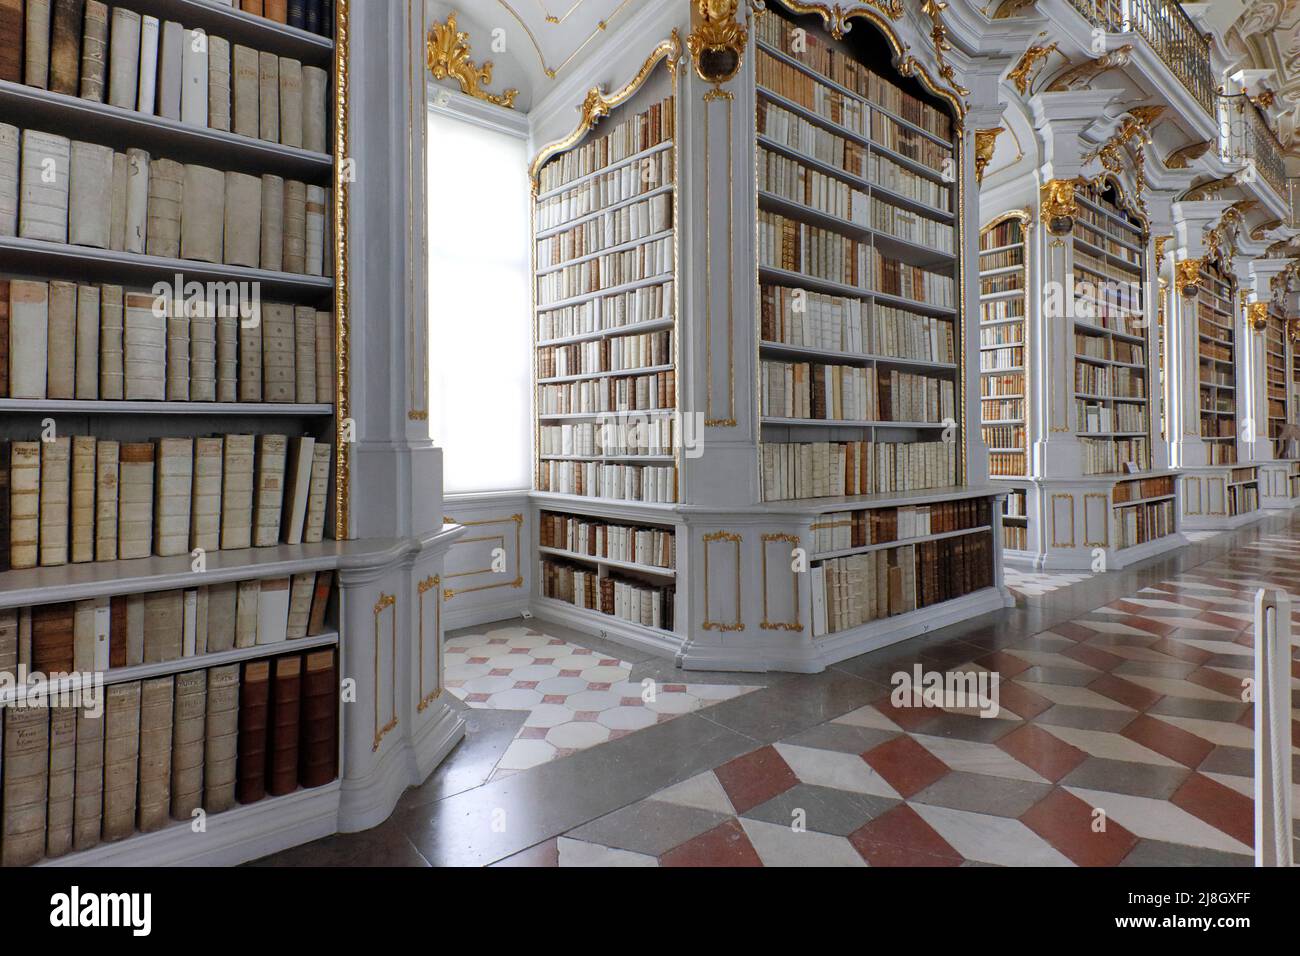 The gorgeous and artistic monastery library of Admont, Styria, Austria Stock Photo